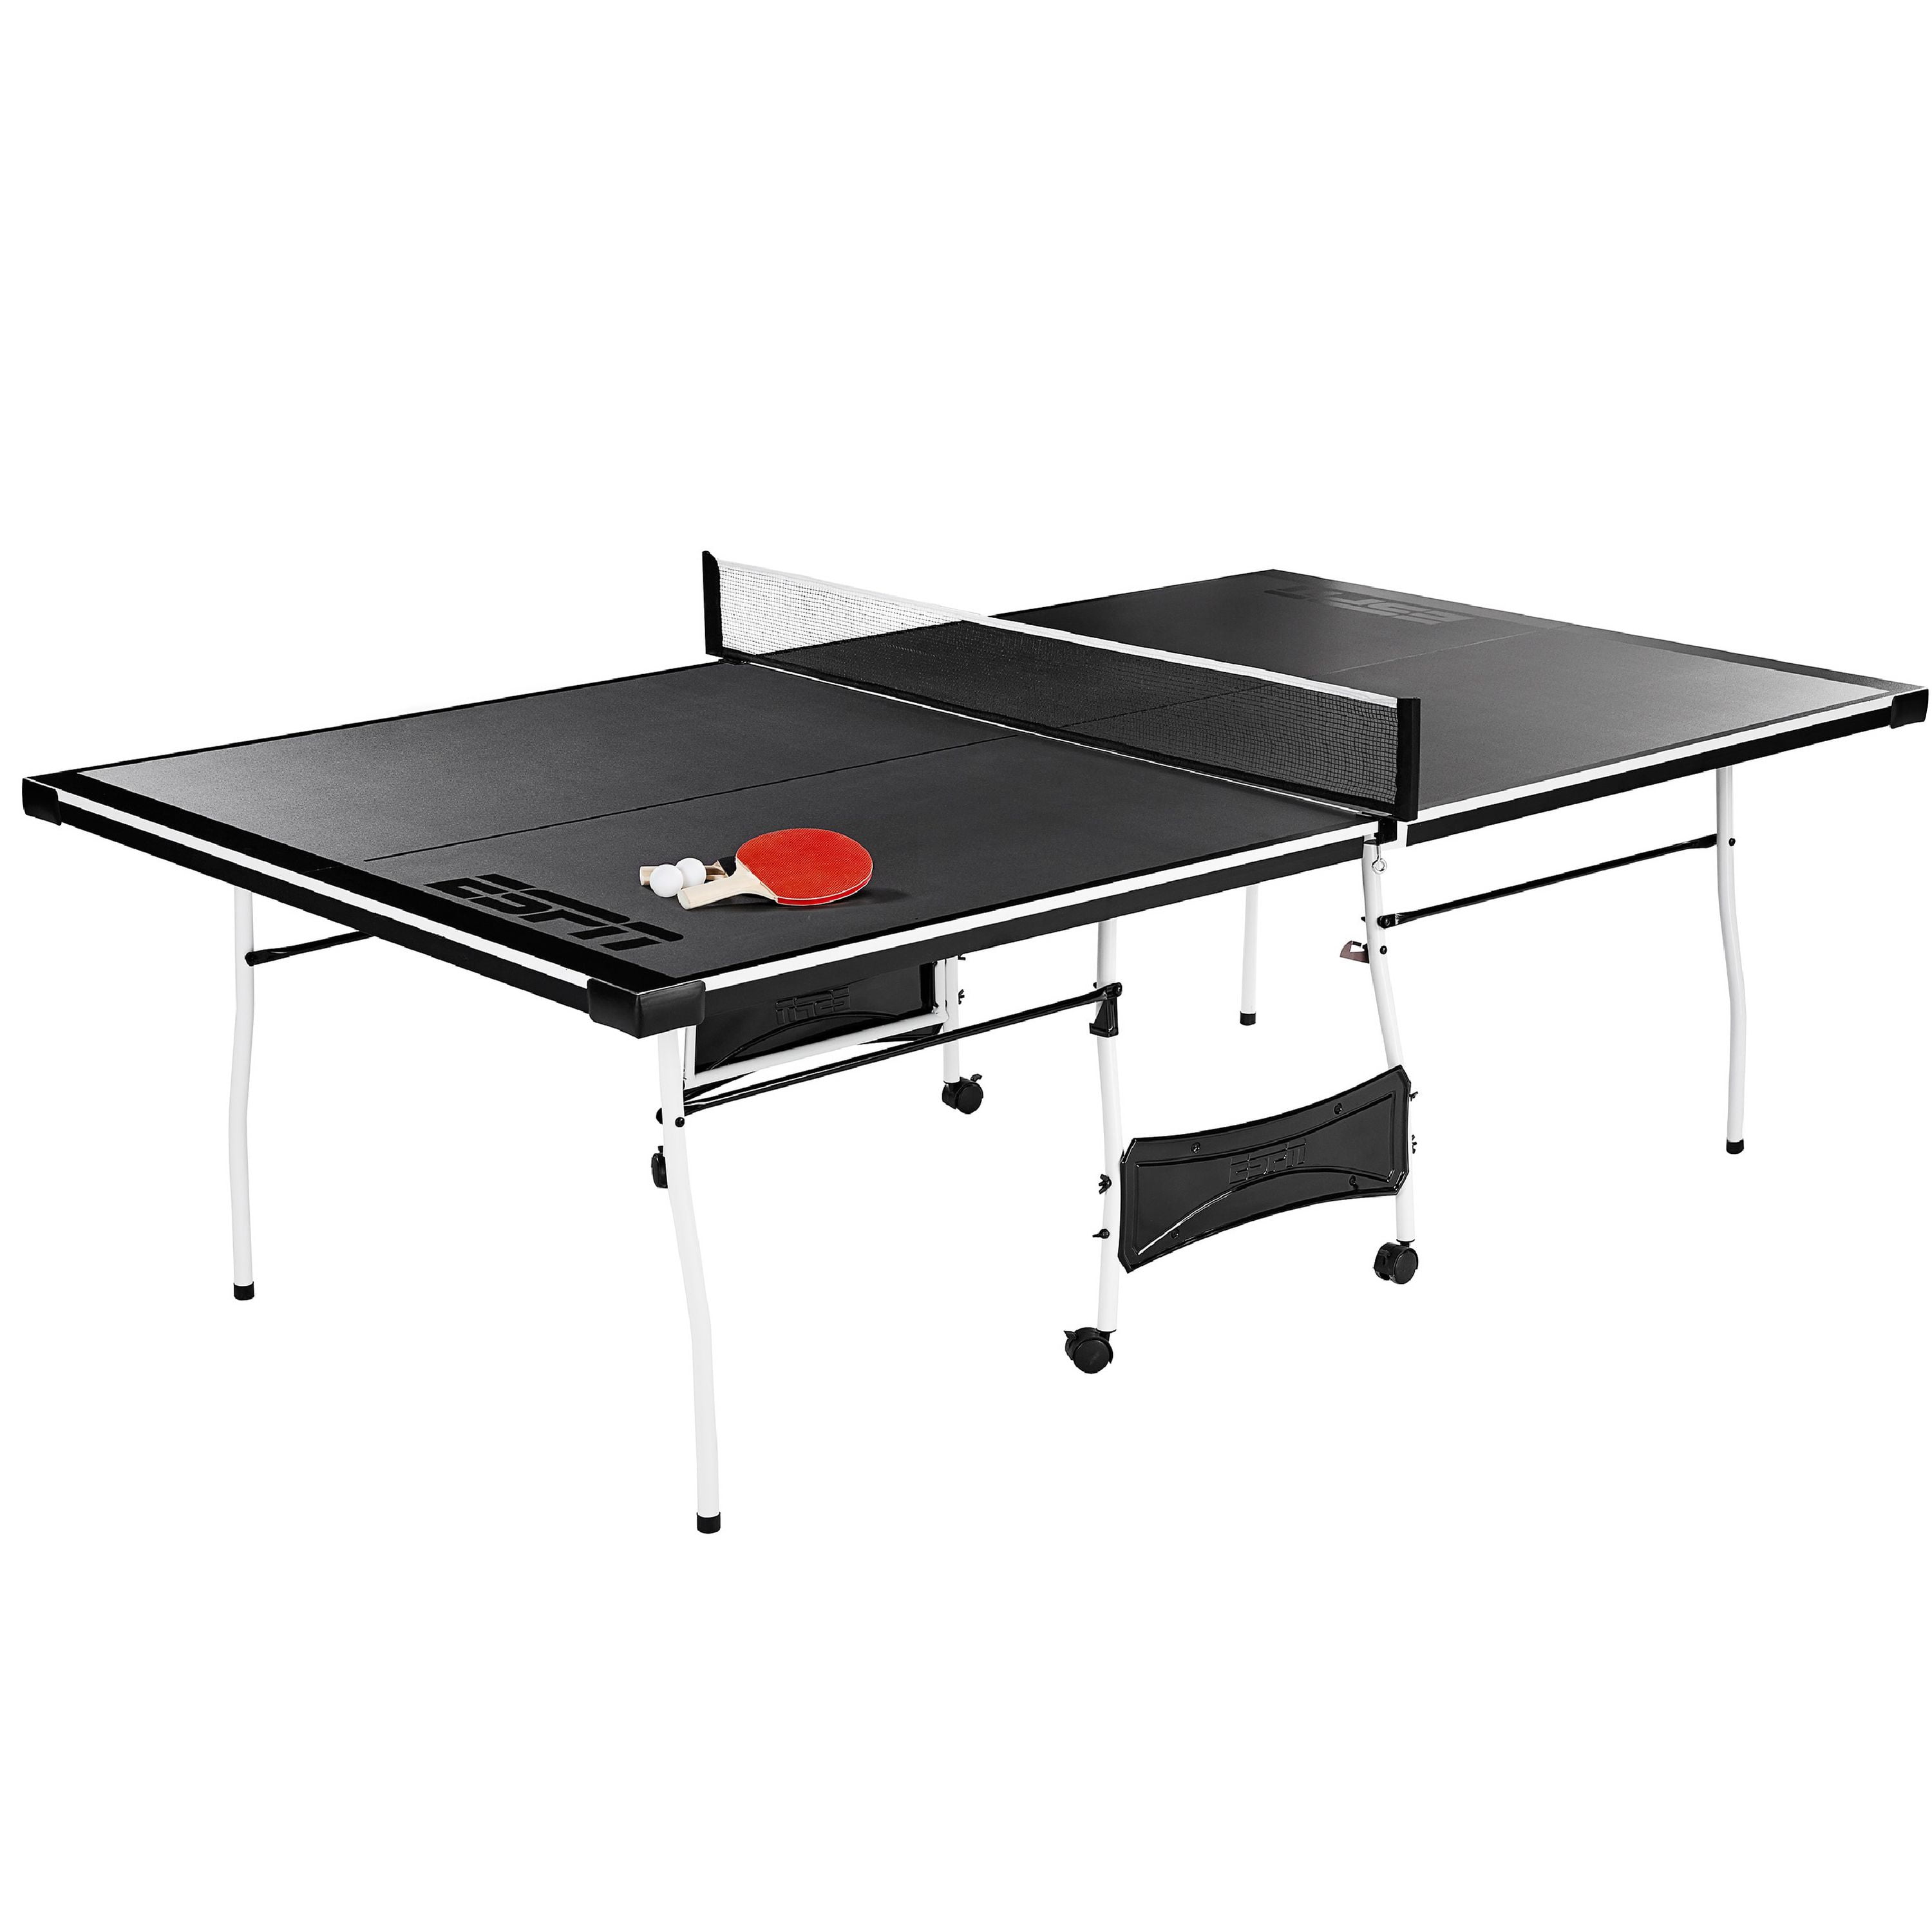 Submerged Extinct Post-impressionism ESPN Mid Size 15mm 4-Piece Indoor Table Tennis Table, Accessories Included,  Black - Walmart.com